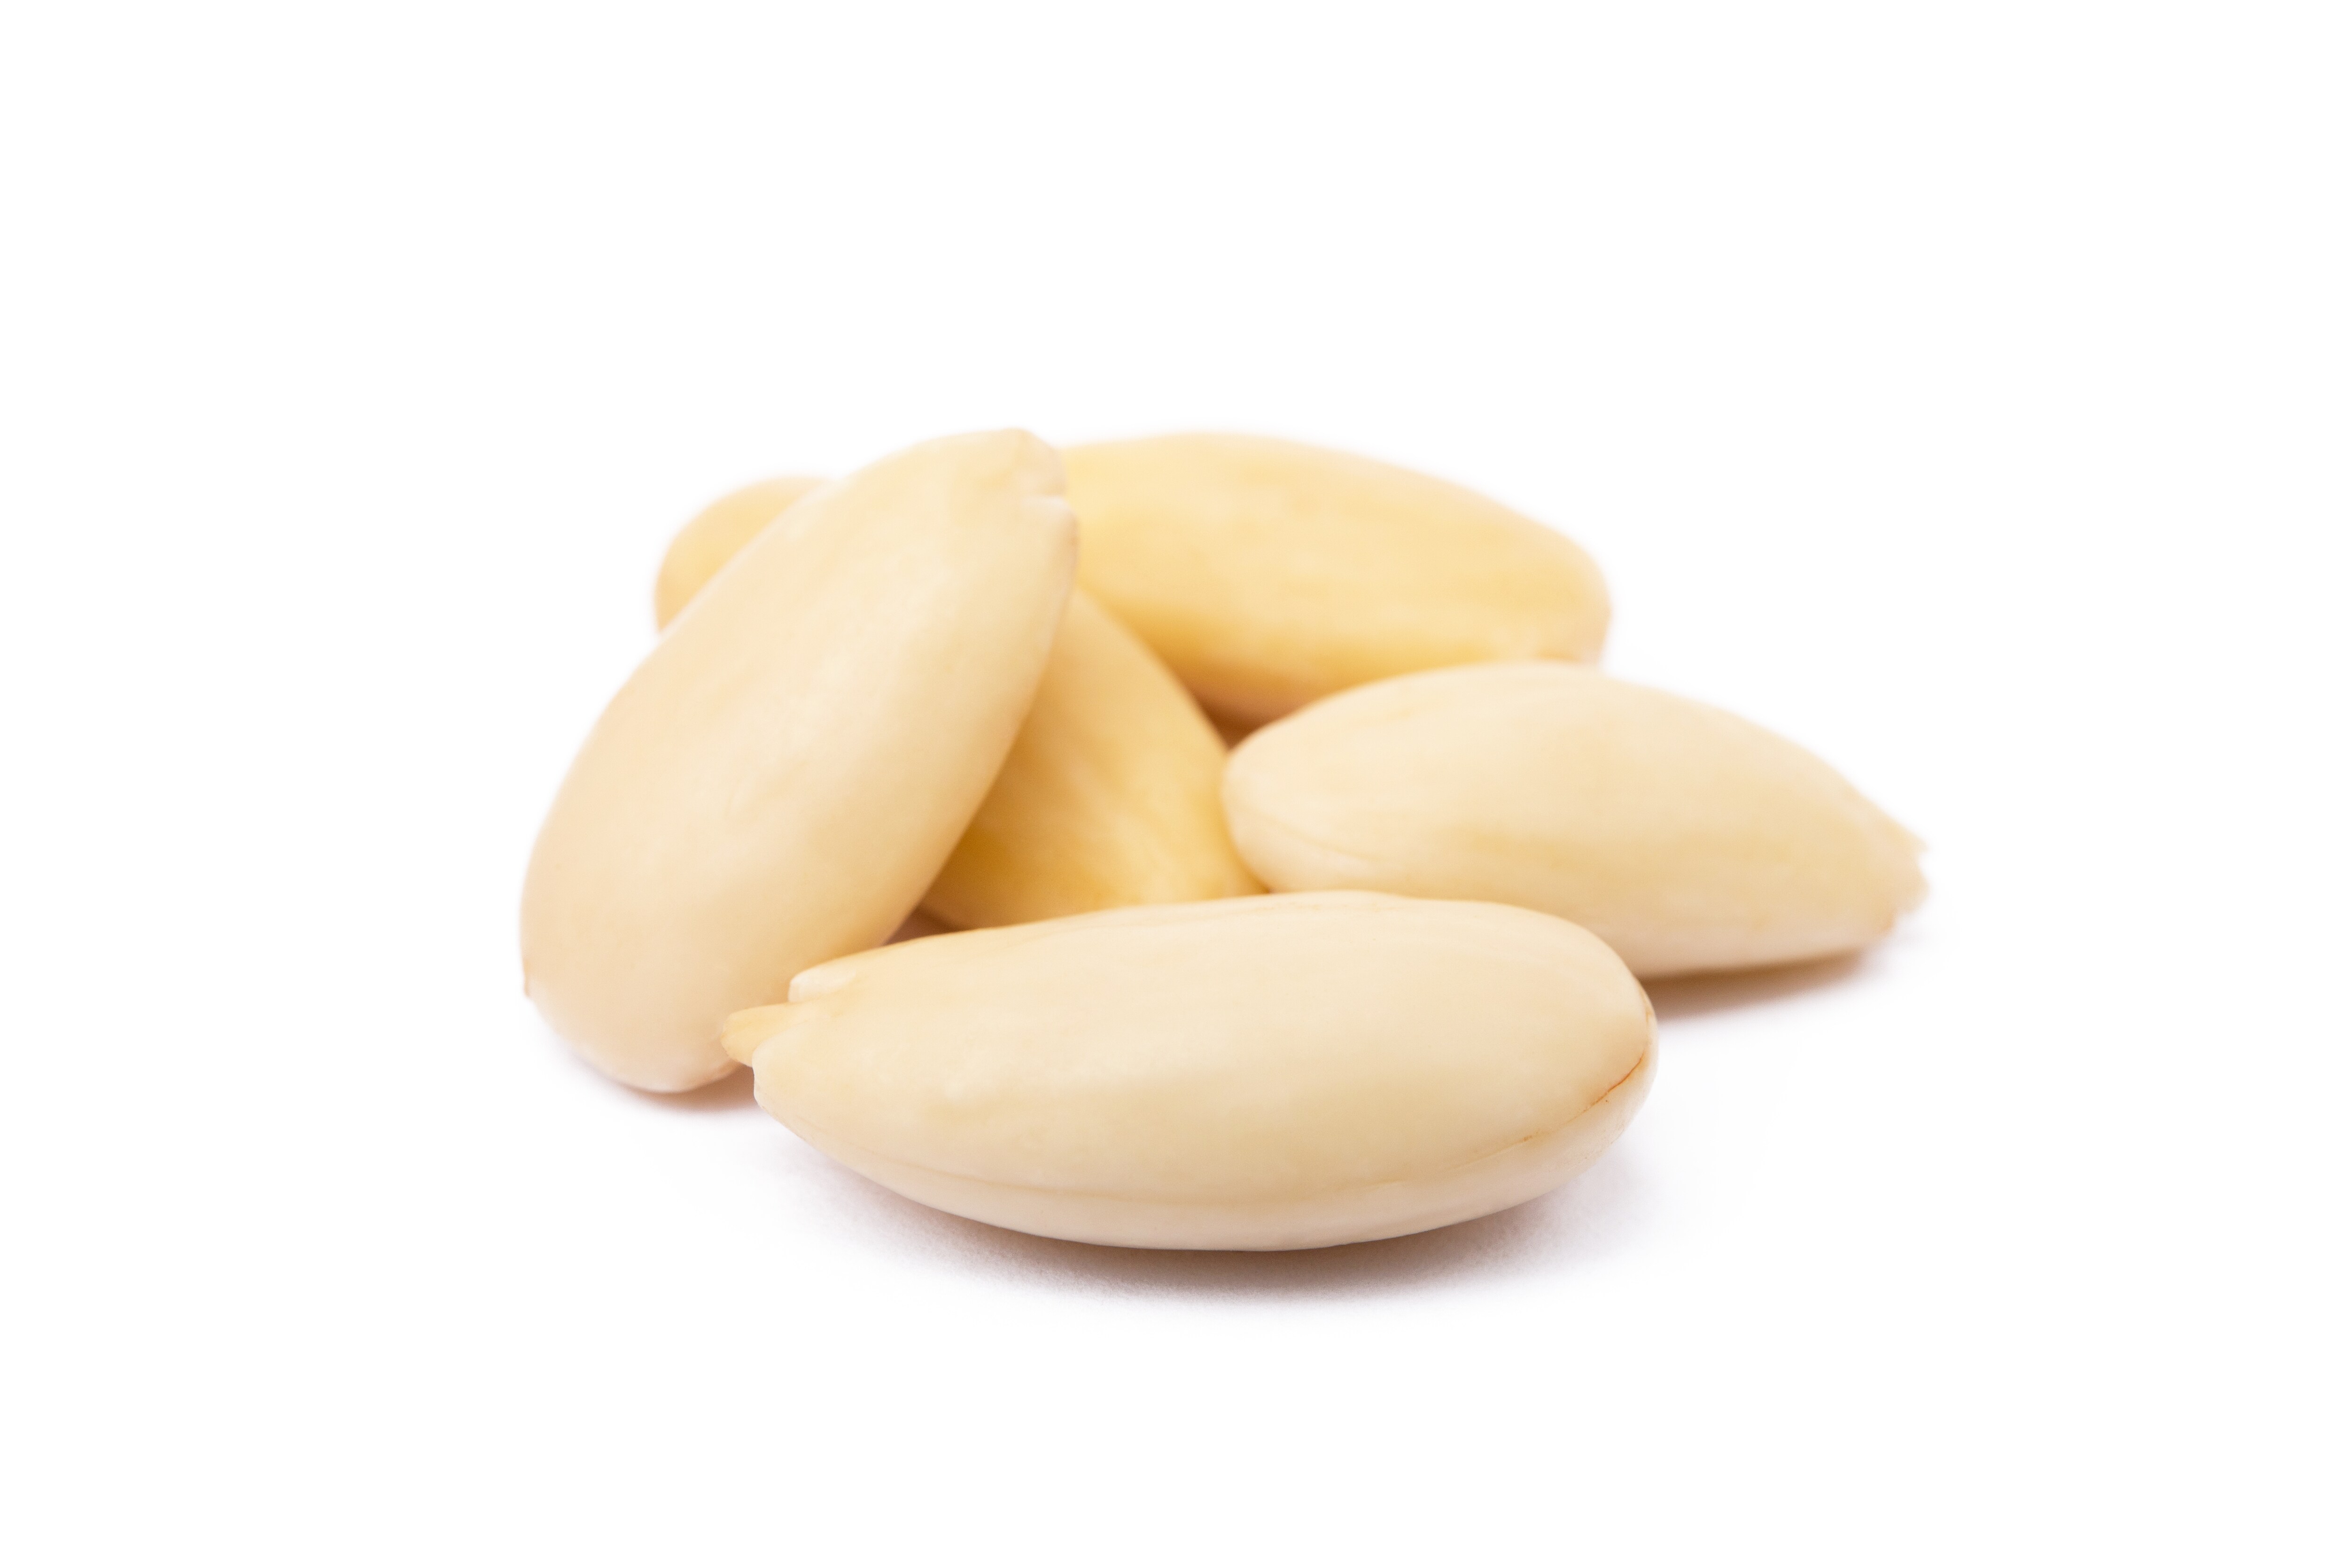 Whole, smooth almonds